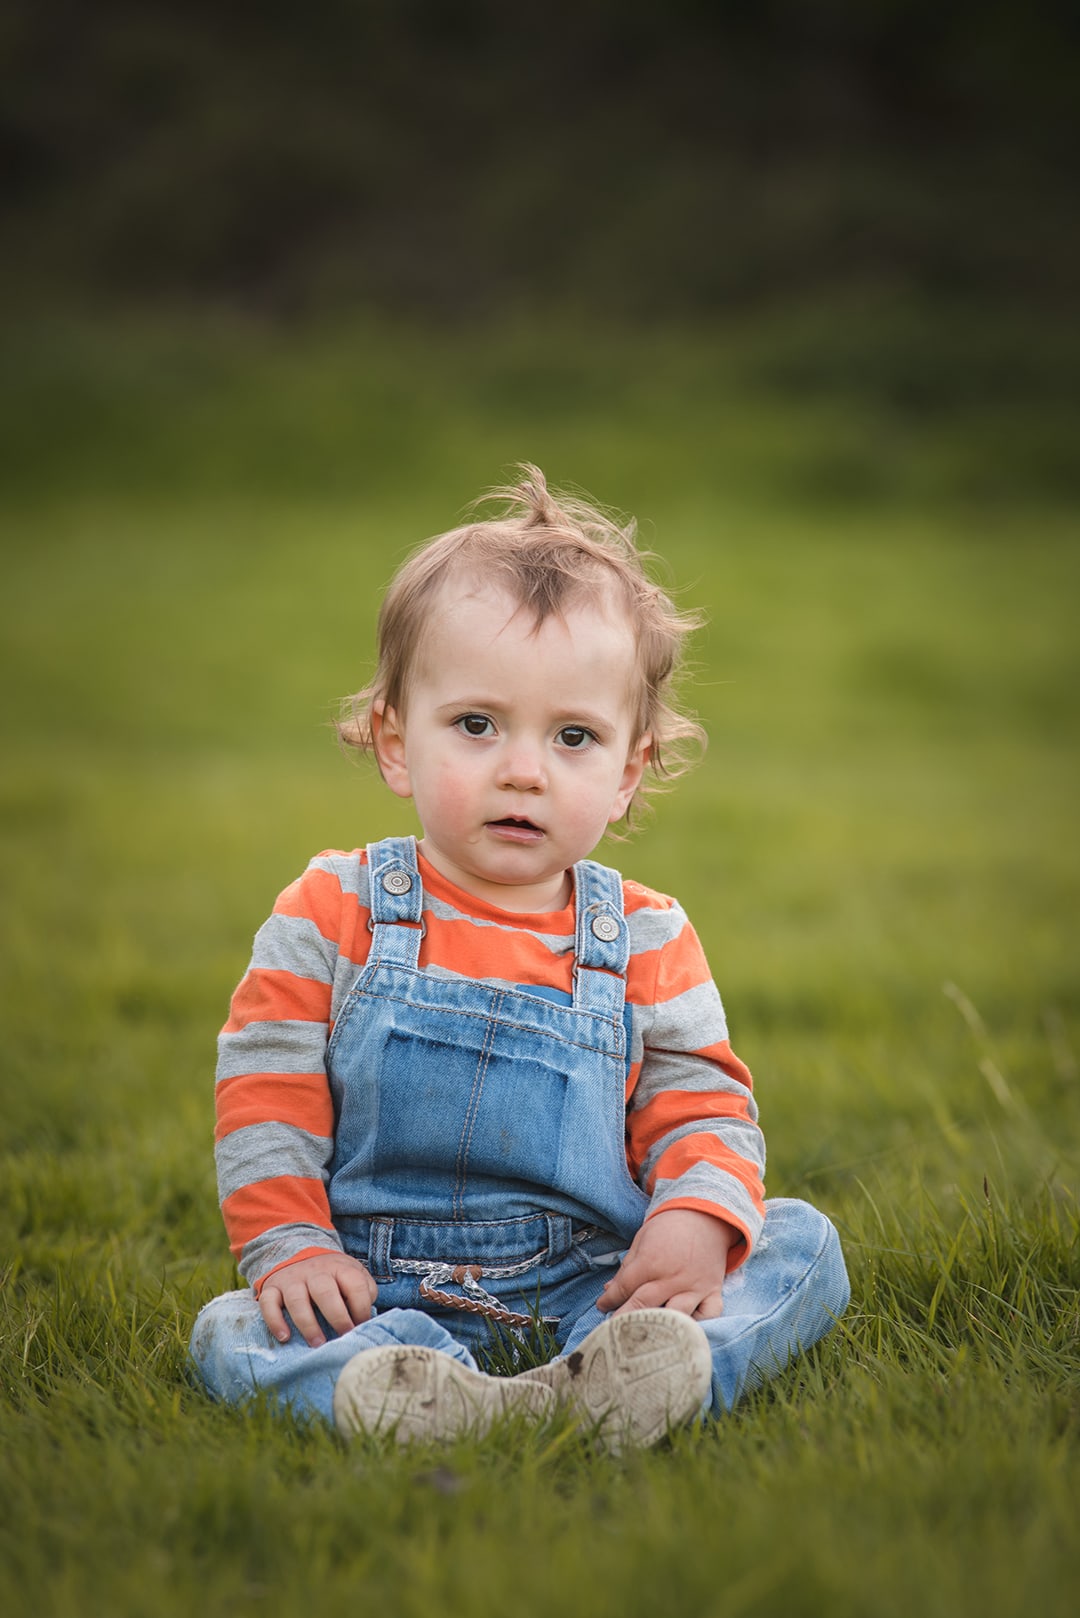 Cute baby girl sitting in grass looking at camera